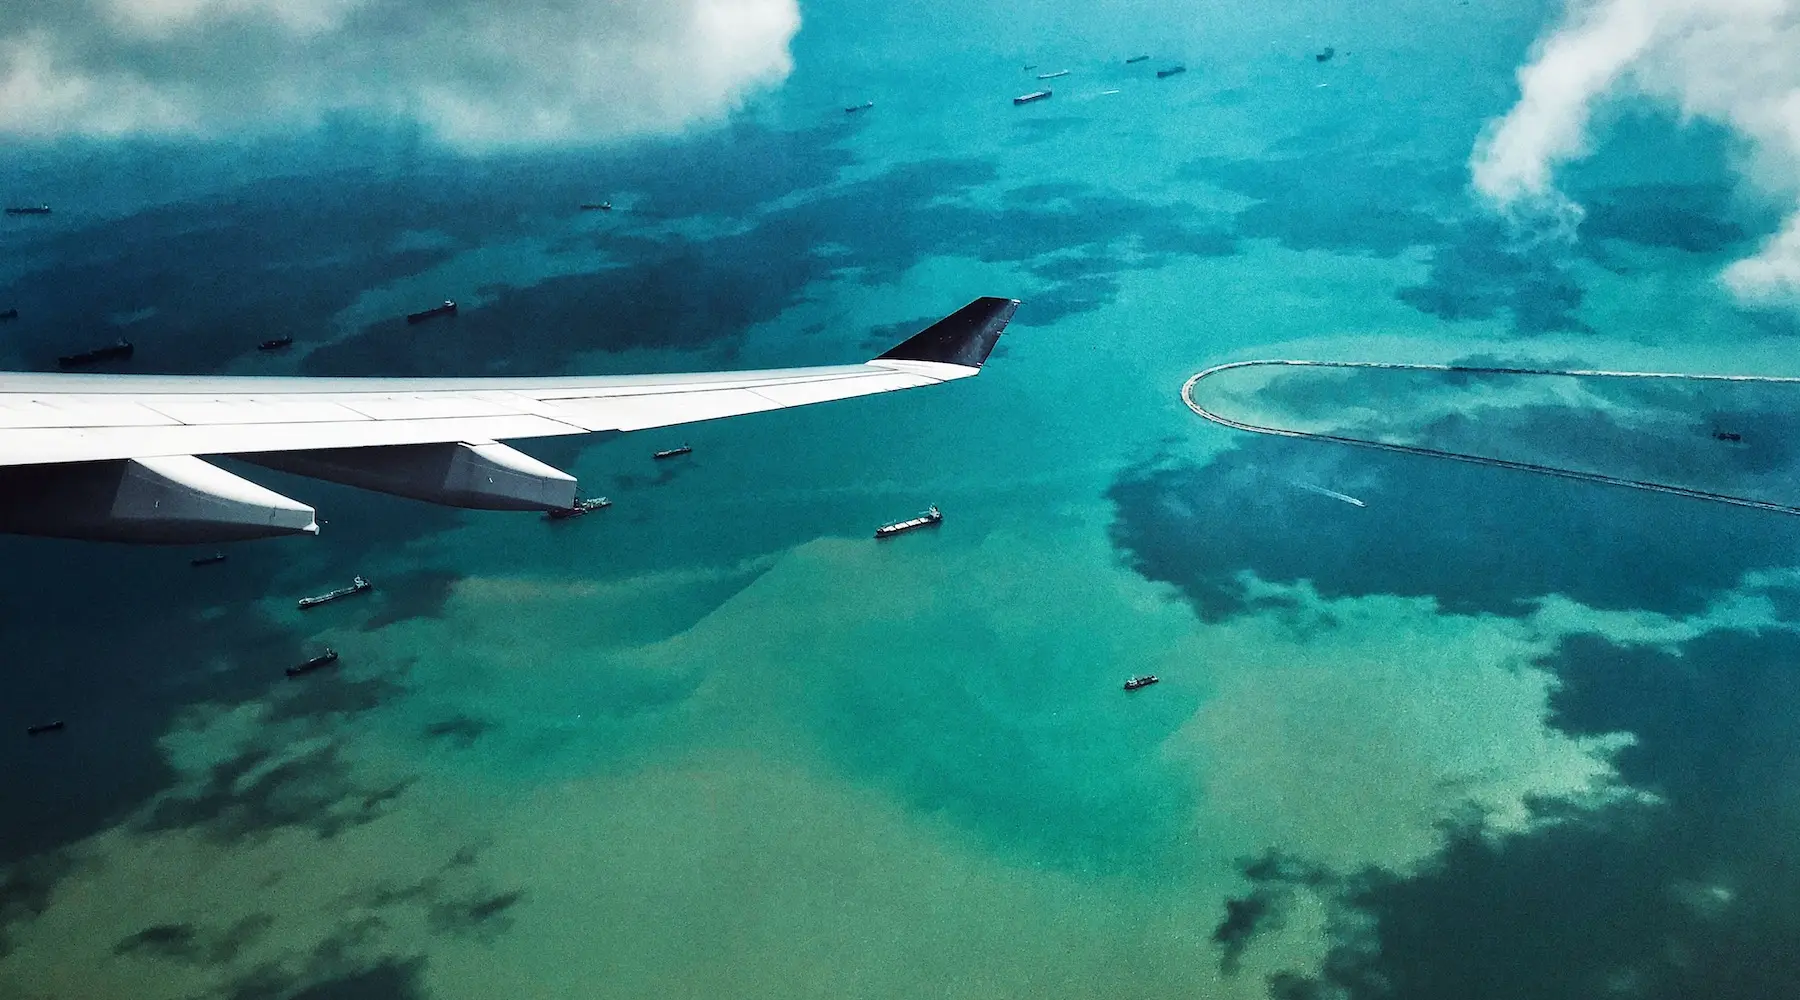 An aerial view of Fiji, with a plane's wing showing as it flies across the islands.